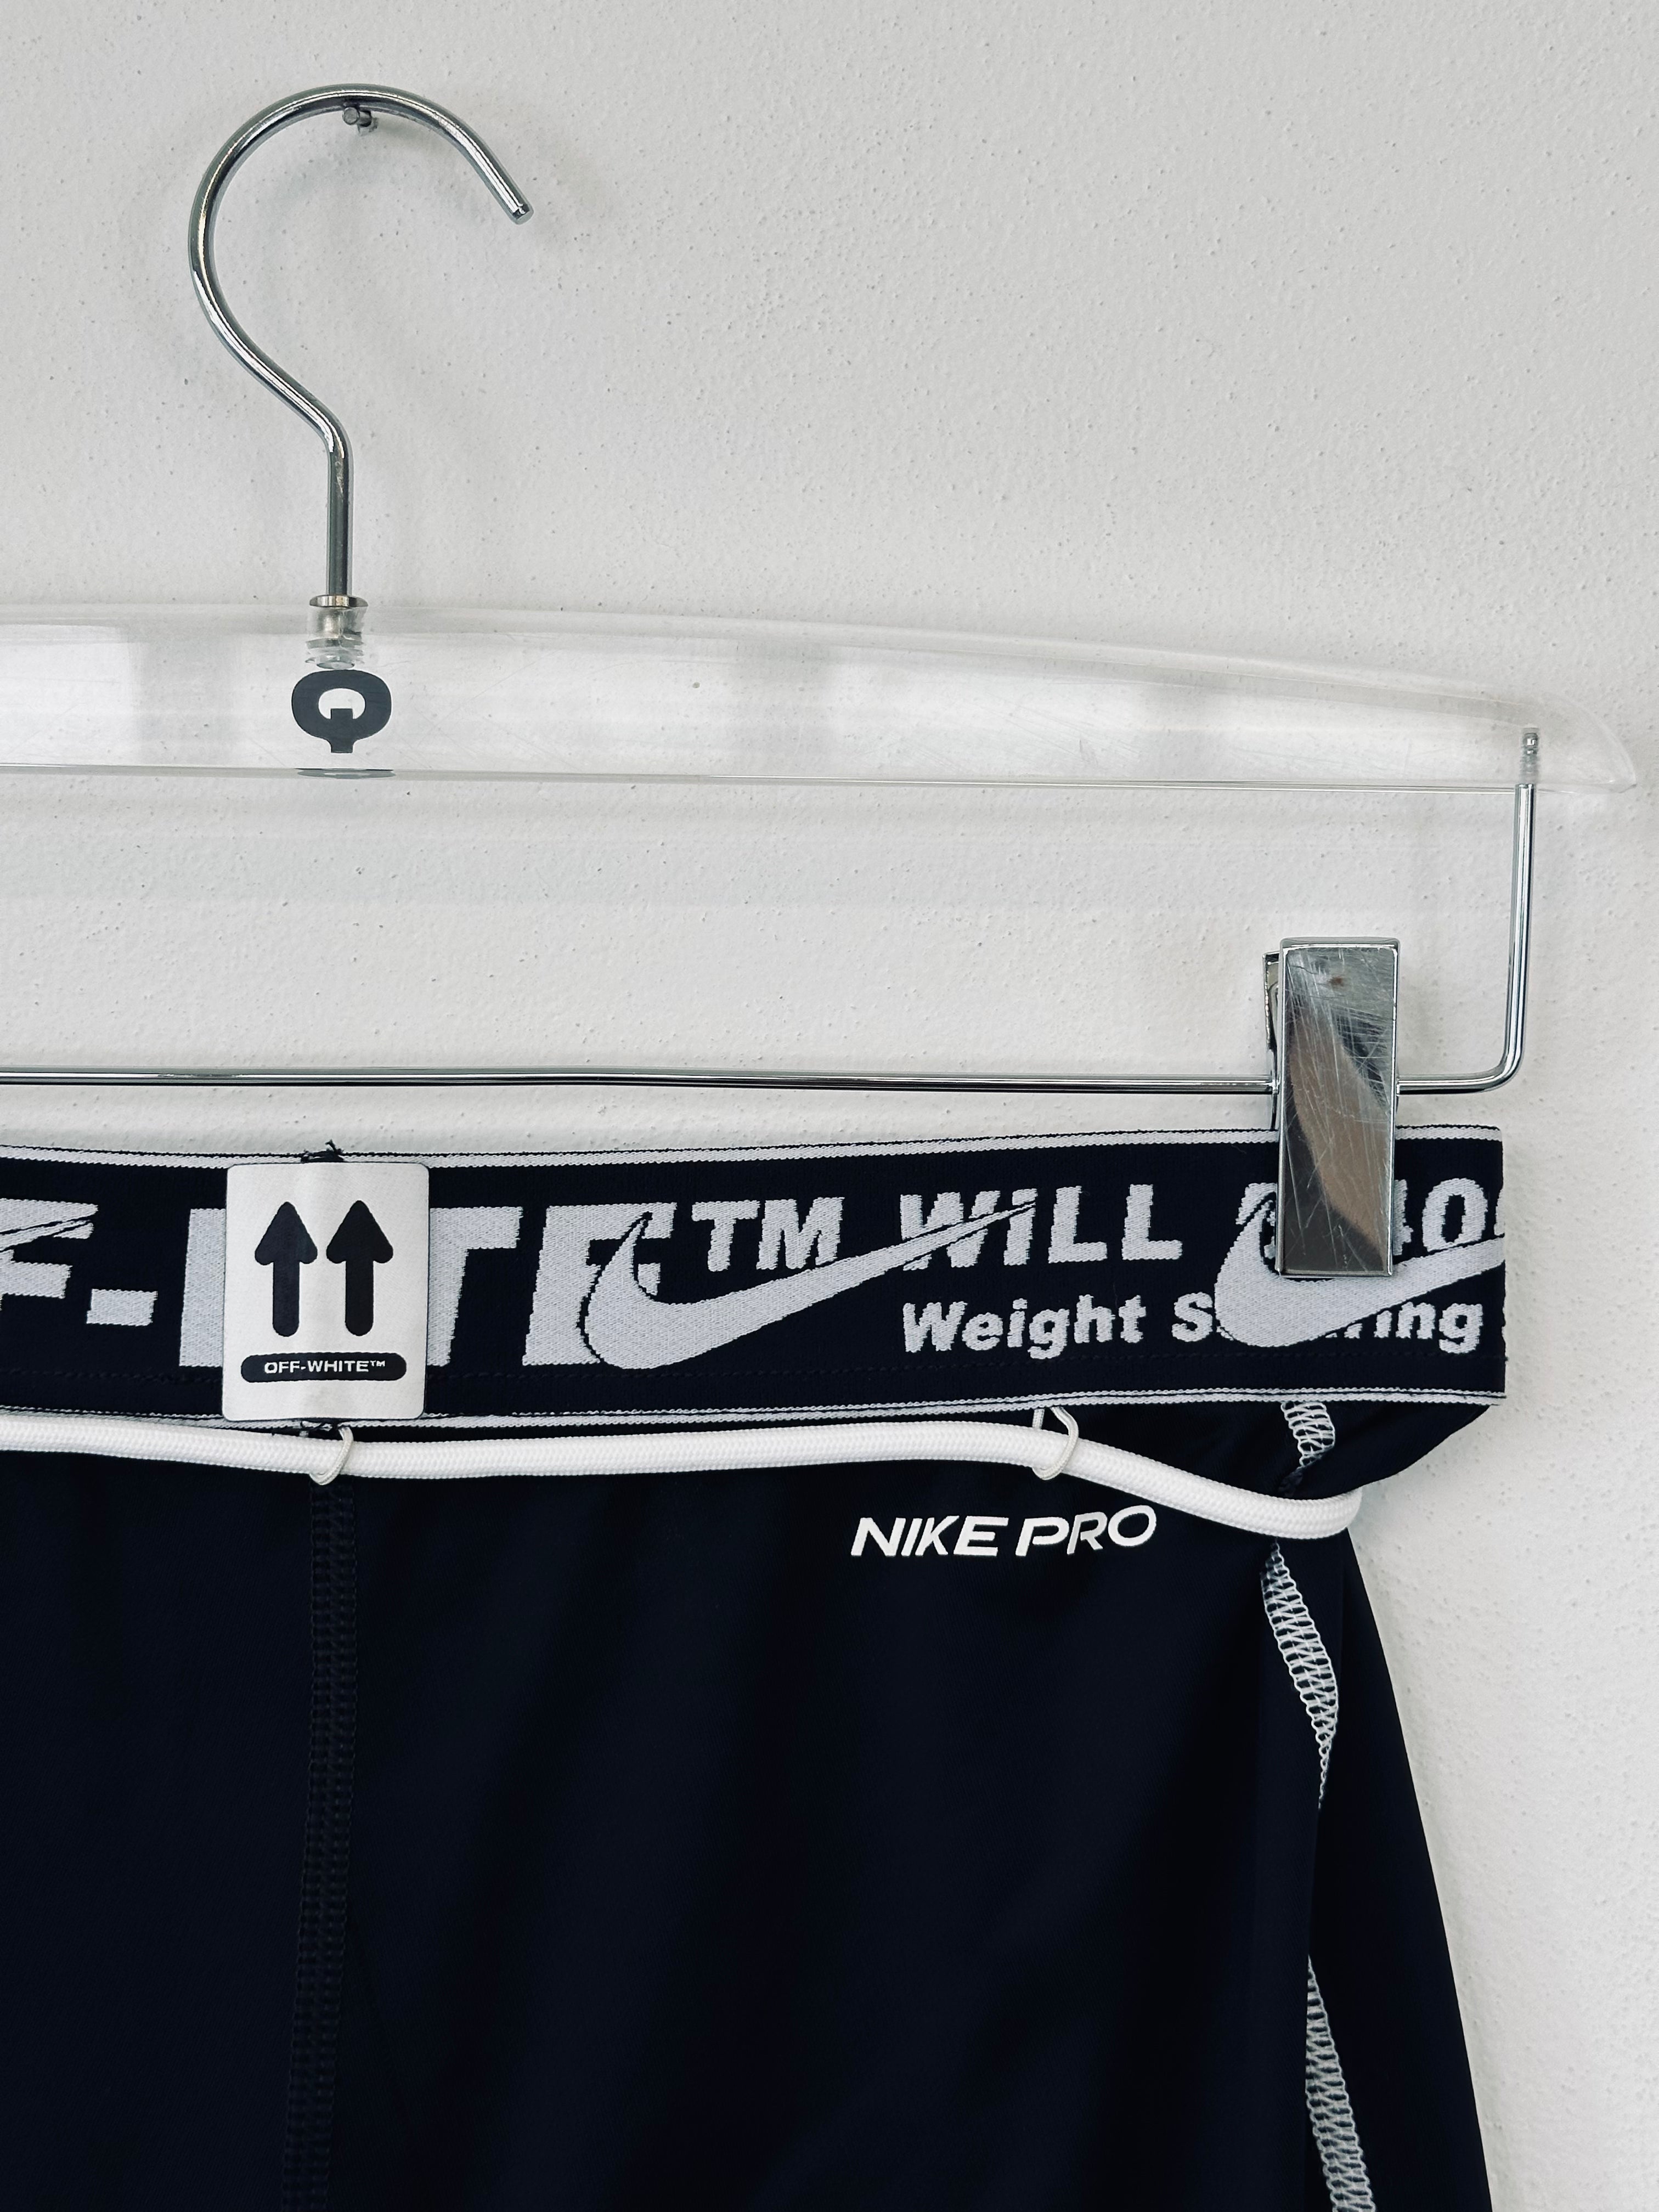 Off White Collab Cycling Leggings